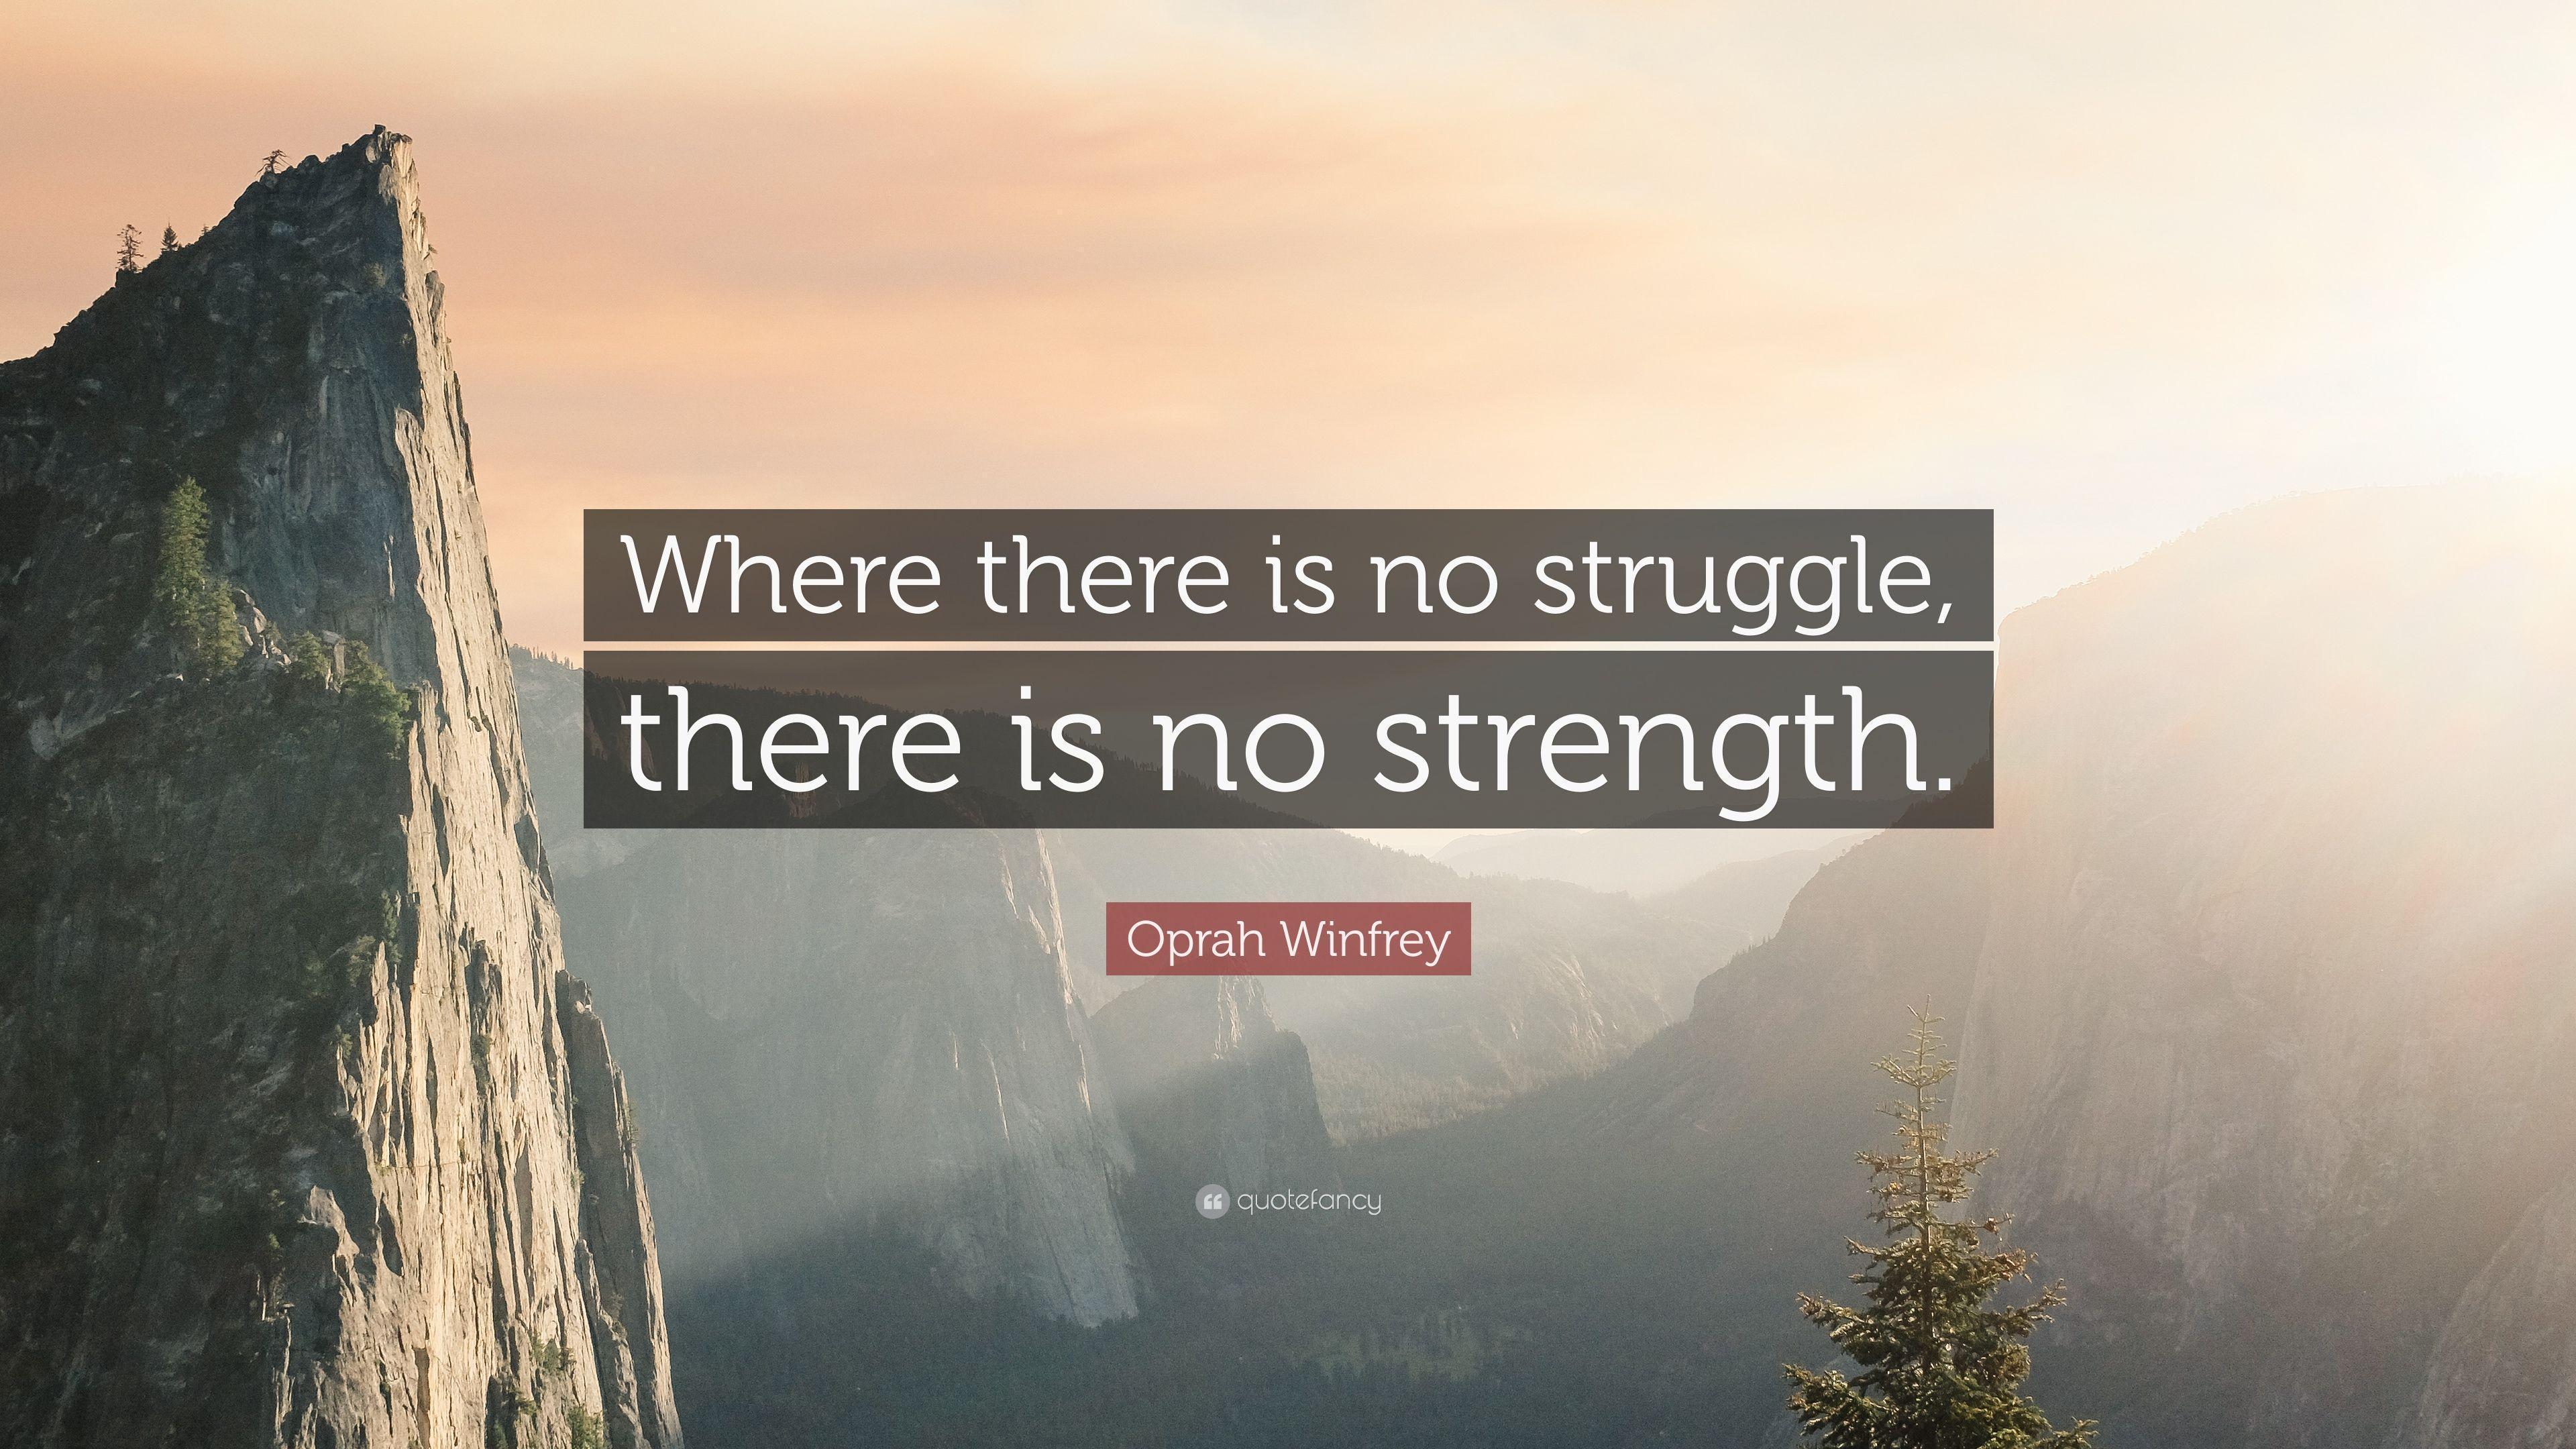 Oprah Winfrey Quote: “Where there is no struggle, there is no